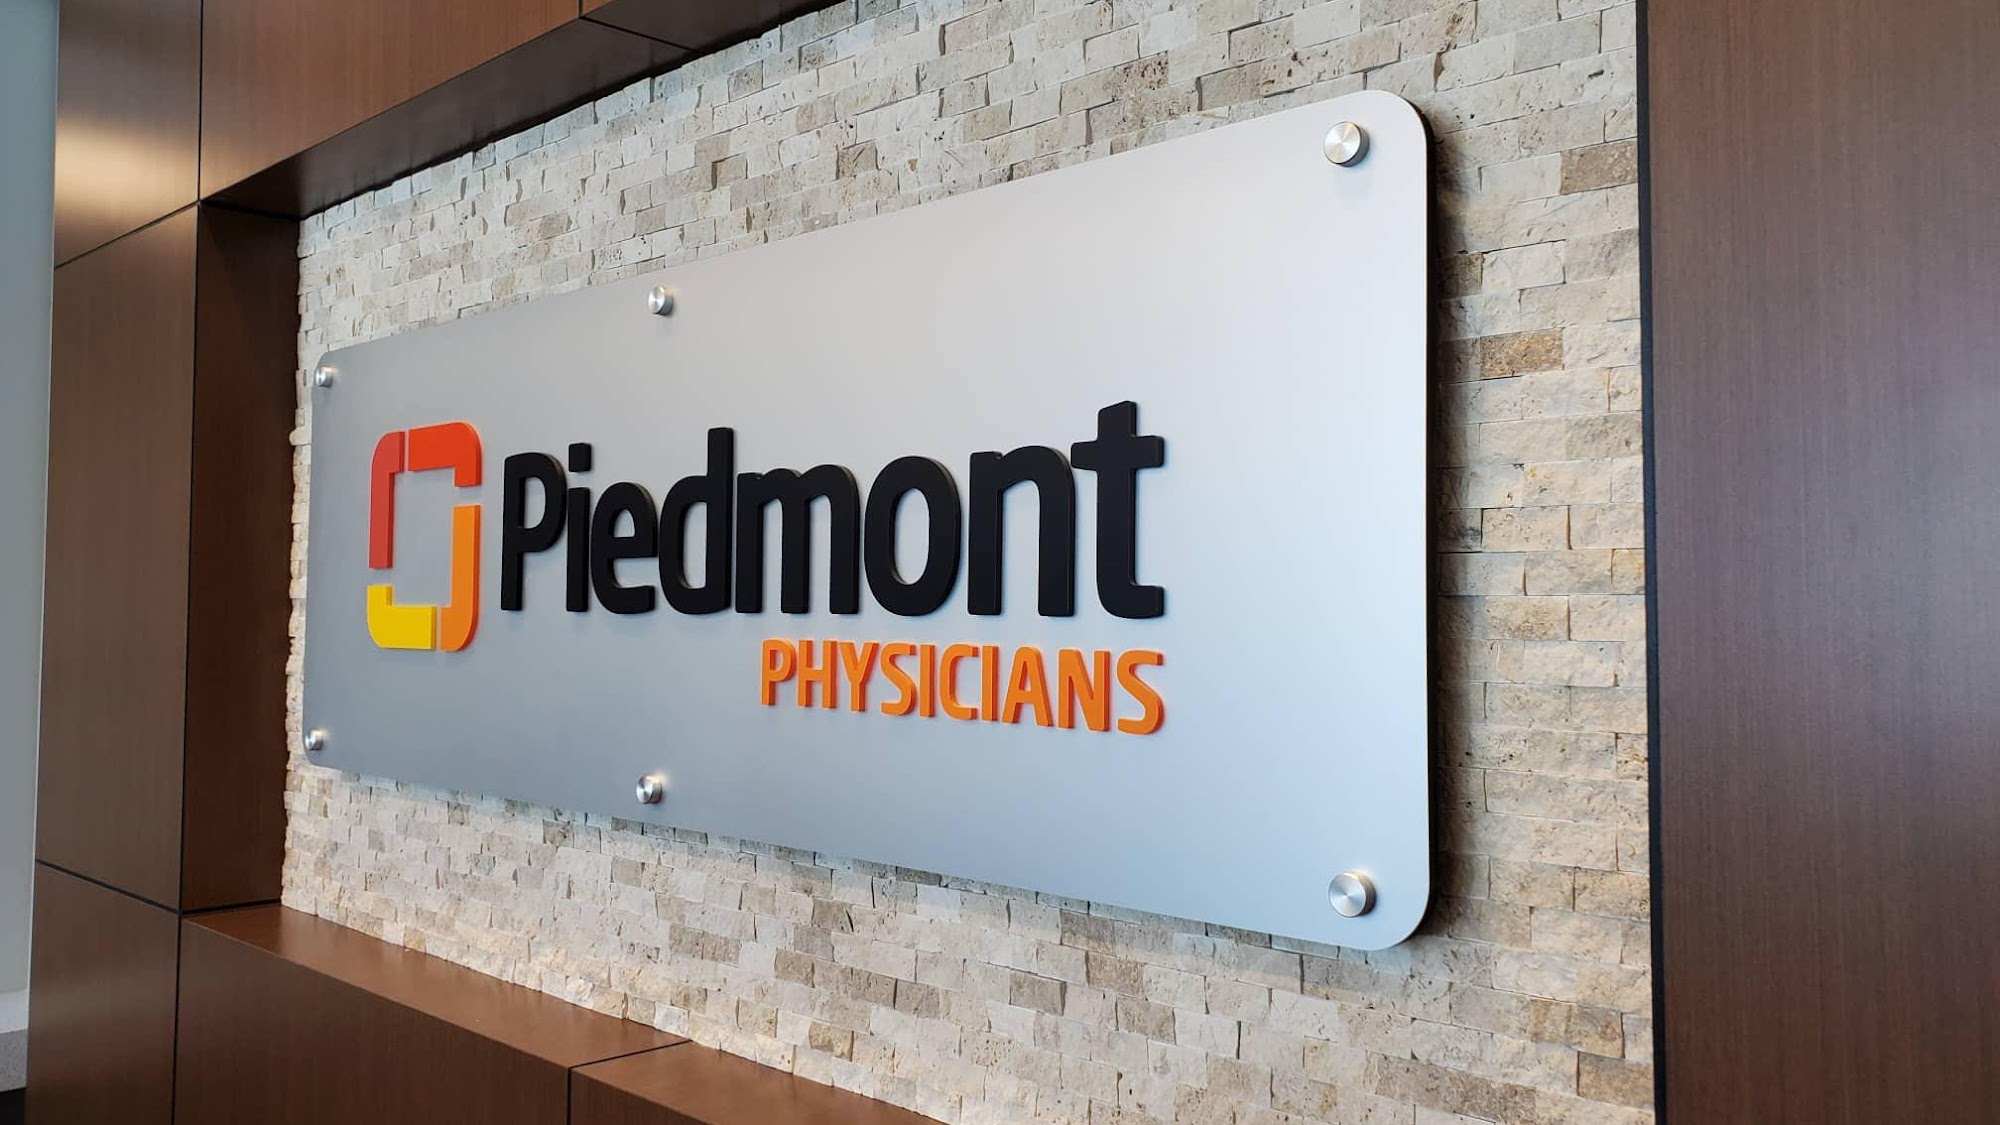 Piedmont Physicians of Sandy Springs